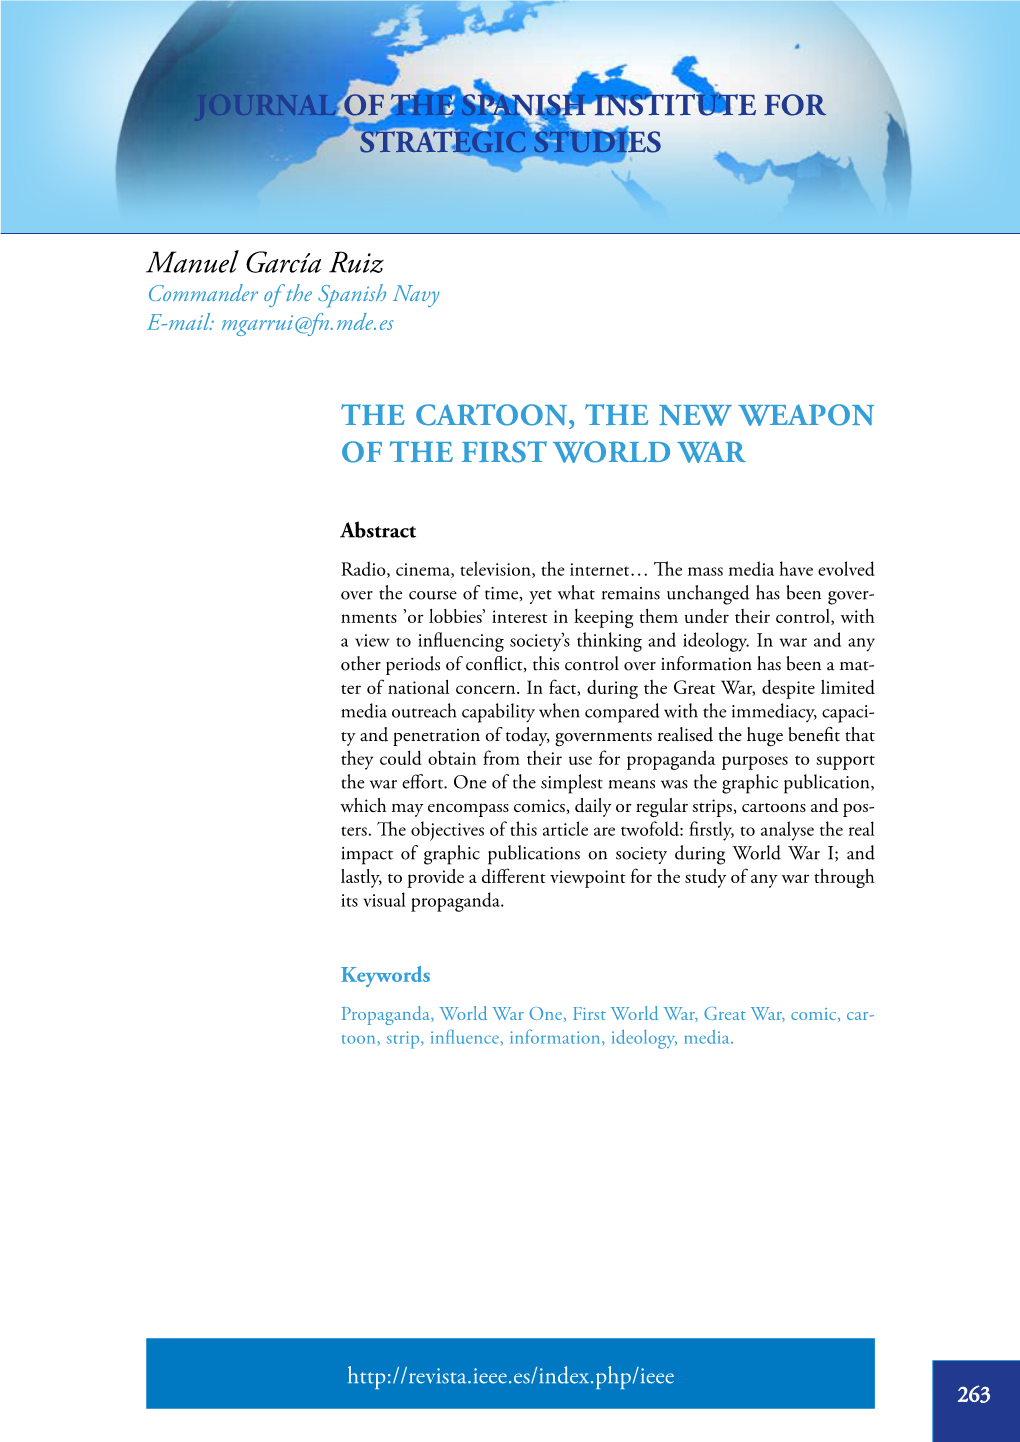 JOURNAL of the SPANISH INSTITUTE for STRATEGIC STUDIES Manuel García Ruiz the CARTOON, the NEW WEAPON of the FIRST WORLD